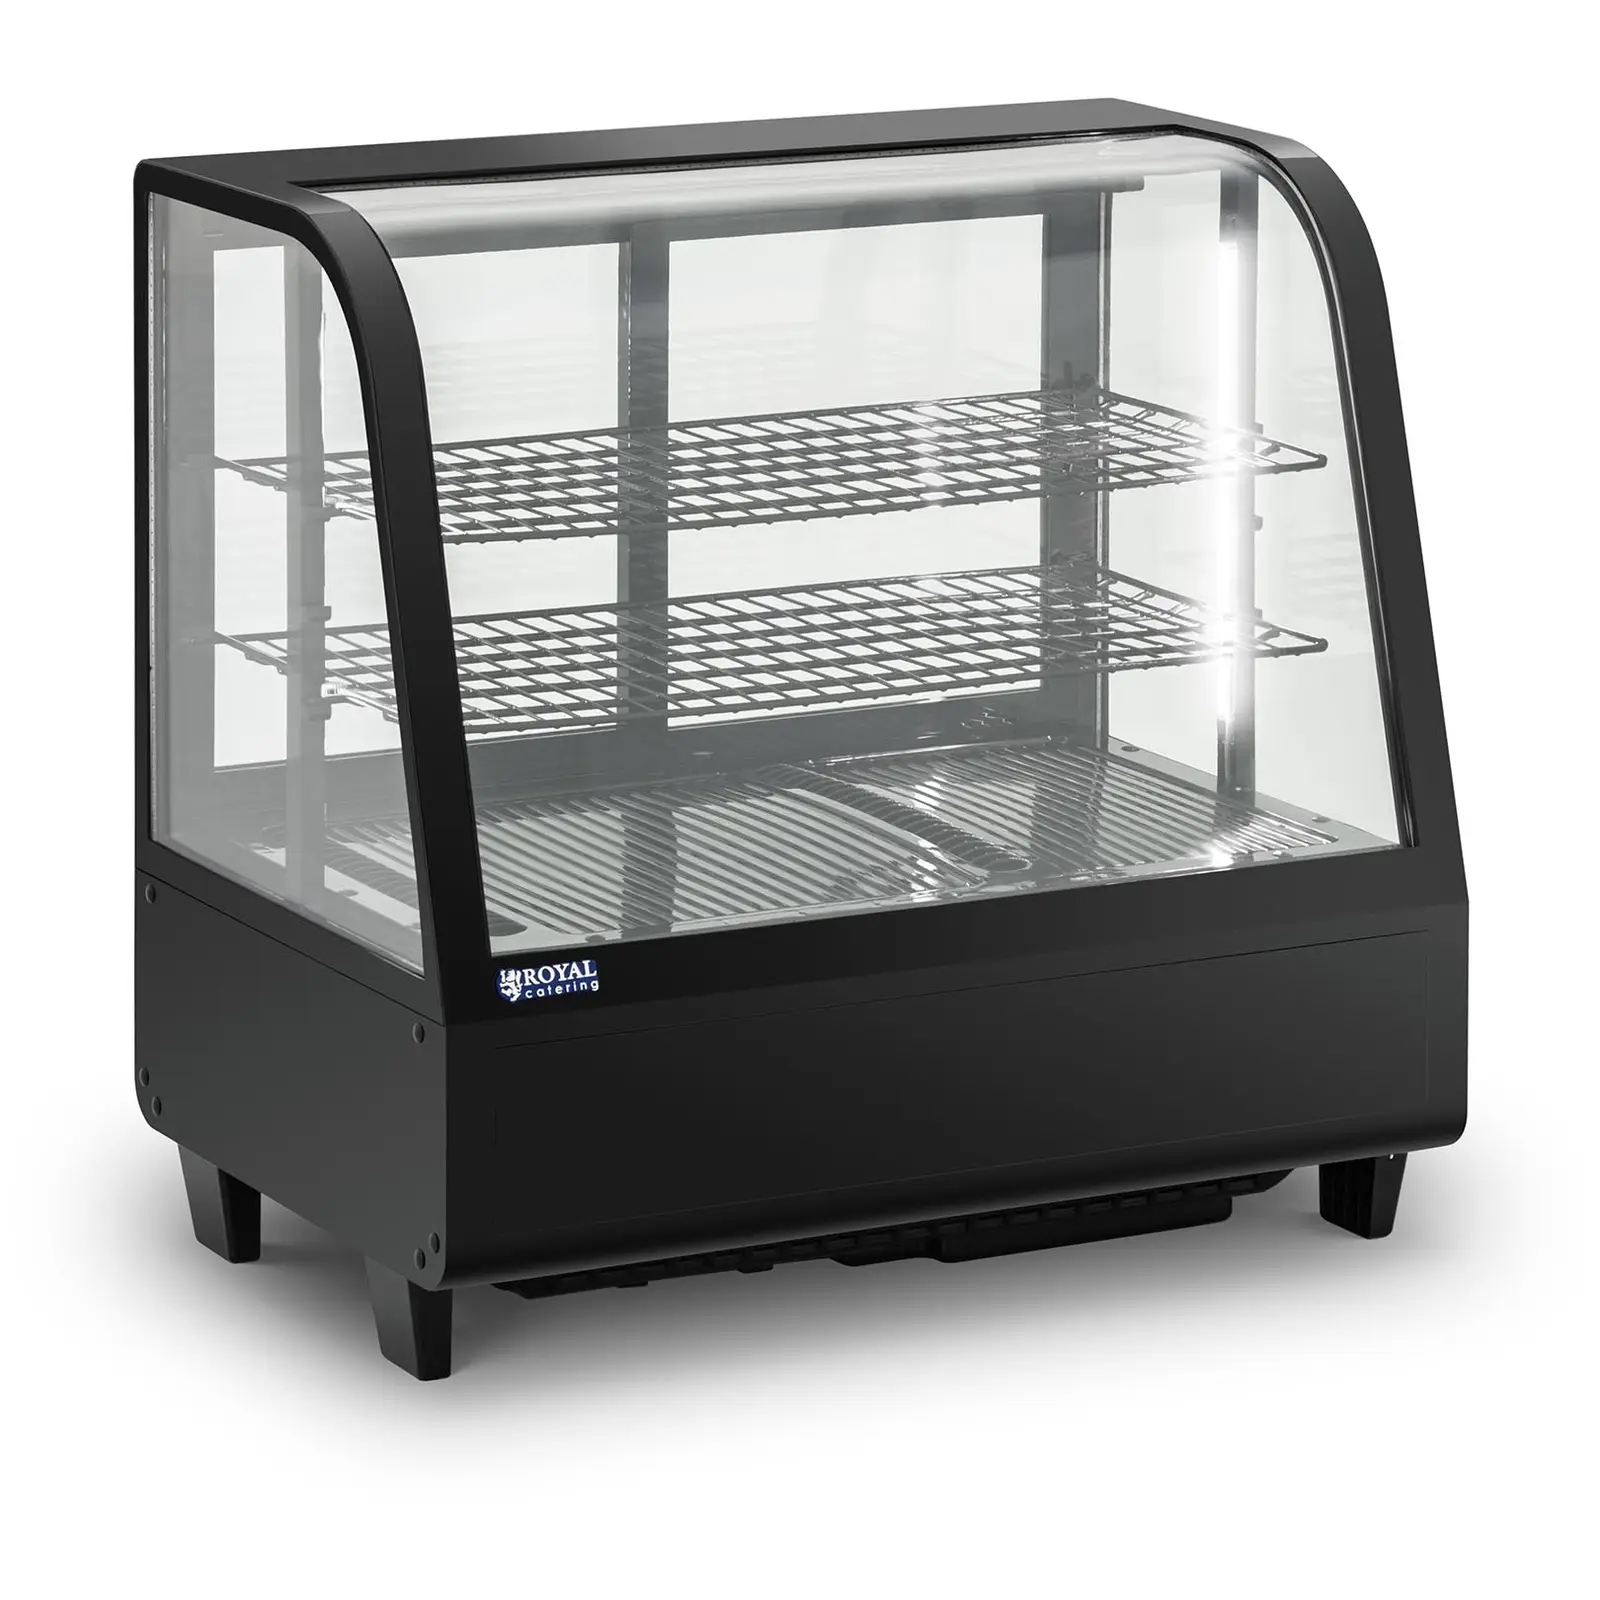 Refrigerated Display Case - 100 L - Royal Catering - 3 levels - black